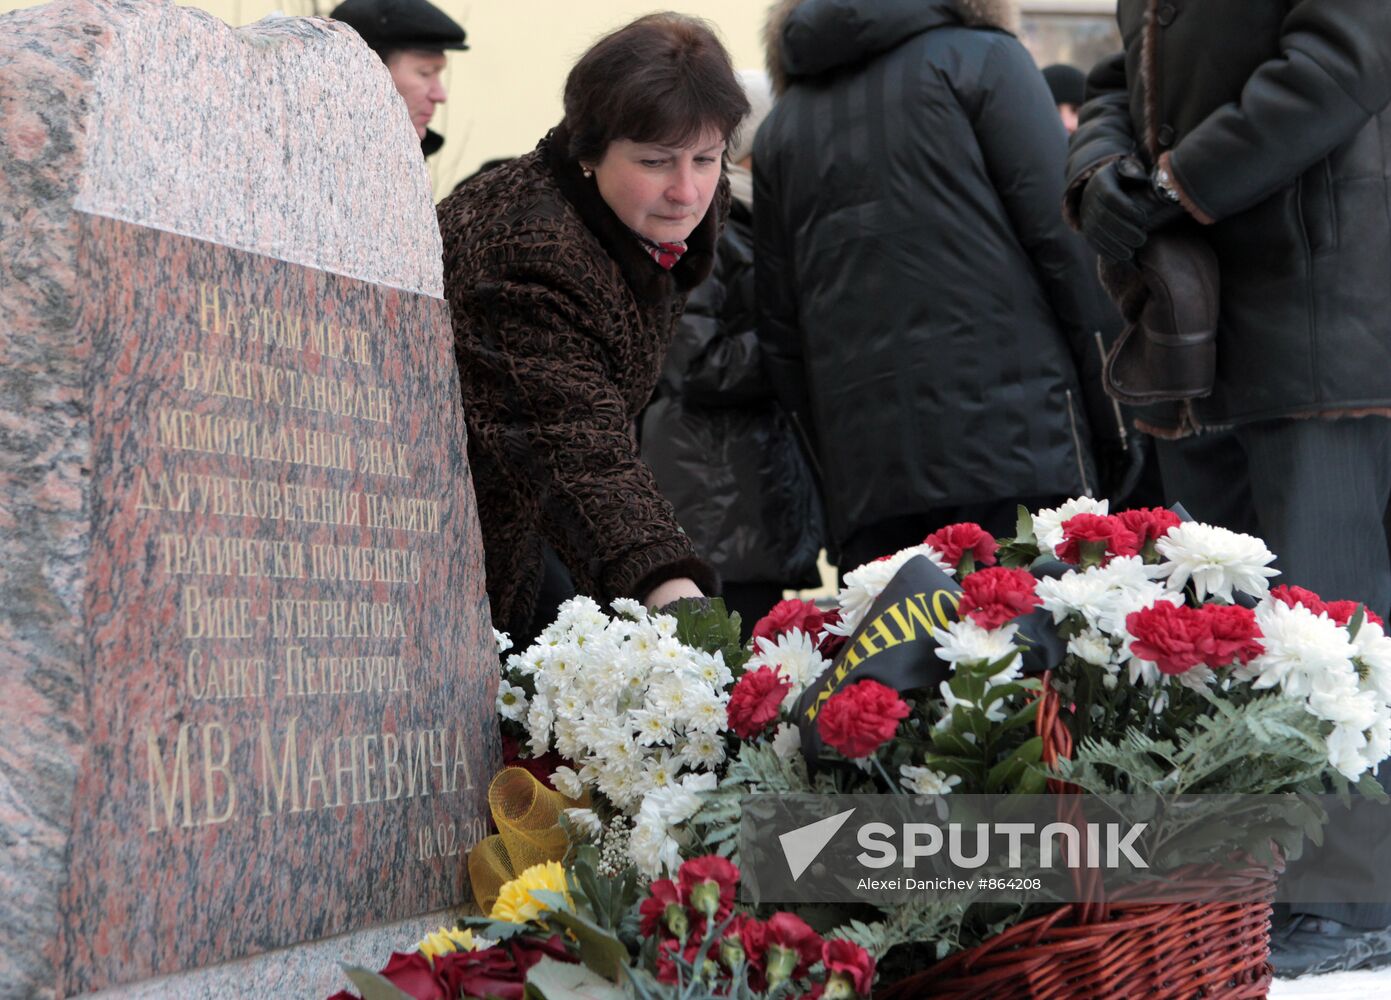 Laying cornerstone for future monument to Mikhail Manevich